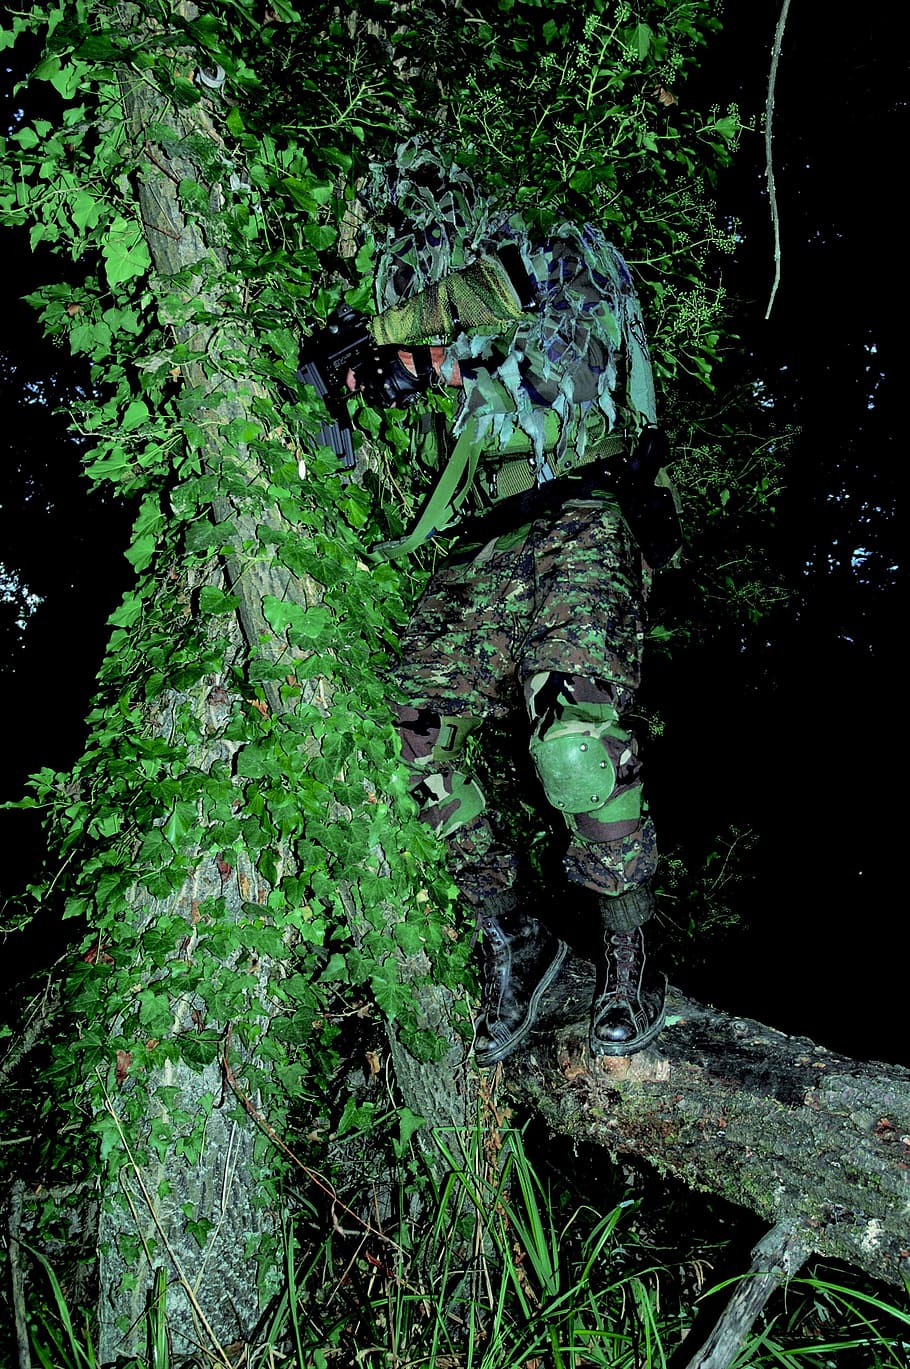 camouflage, camouflaged, soldier, military, hide, man, person, weapon, dangerous, plant